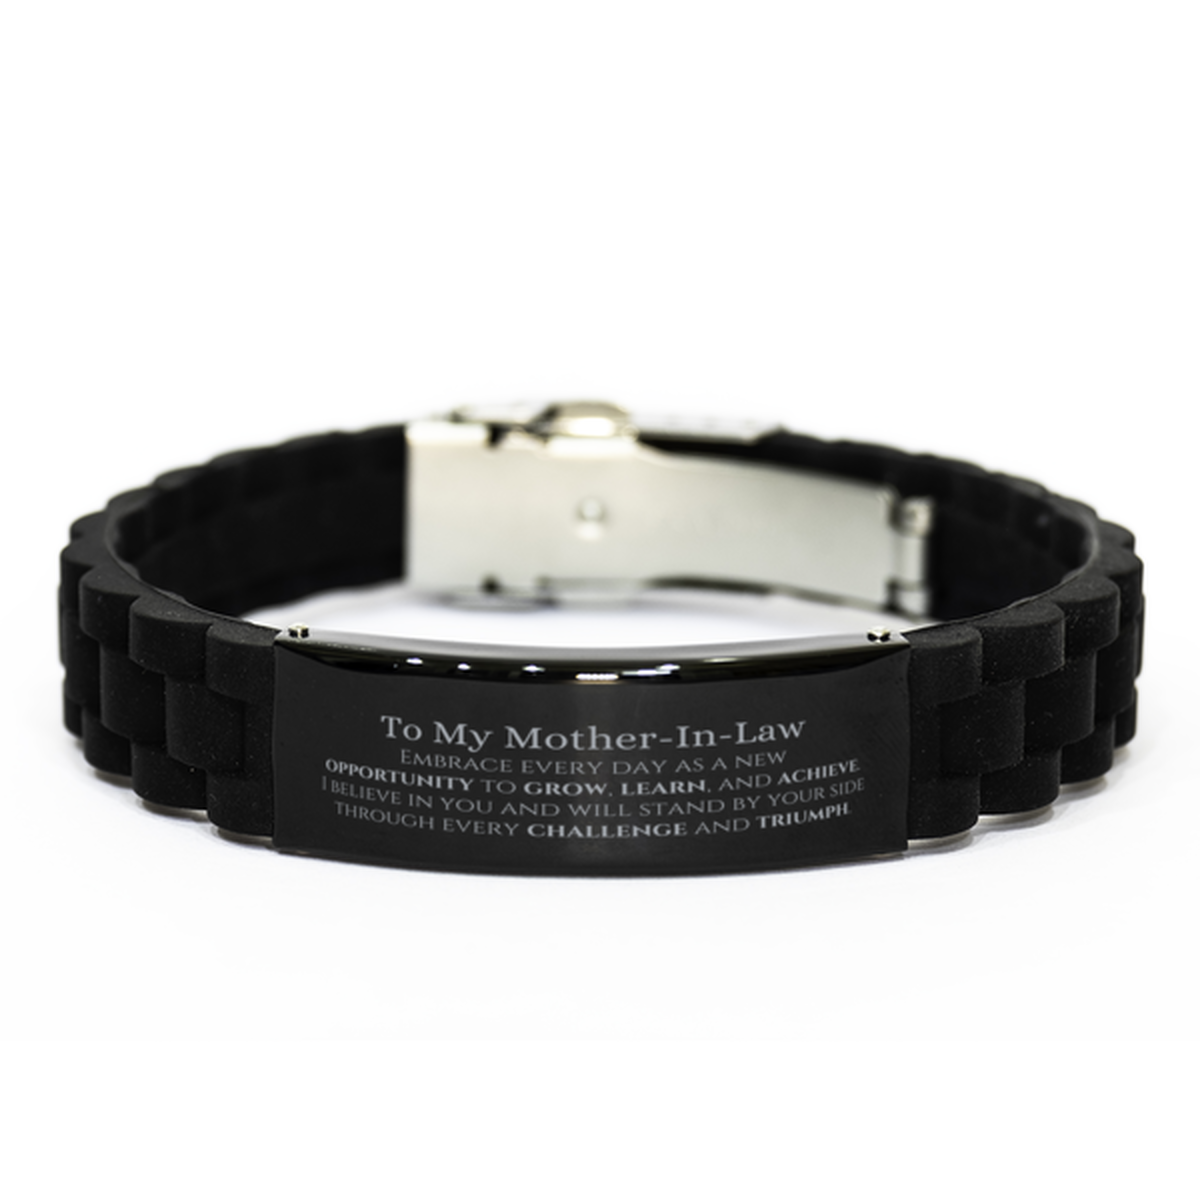 To My Mother-In-Law Gifts, I believe in you and will stand by your side, Inspirational Black Glidelock Clasp Bracelet For Mother-In-Law, Birthday Christmas Motivational Mother-In-Law Gifts